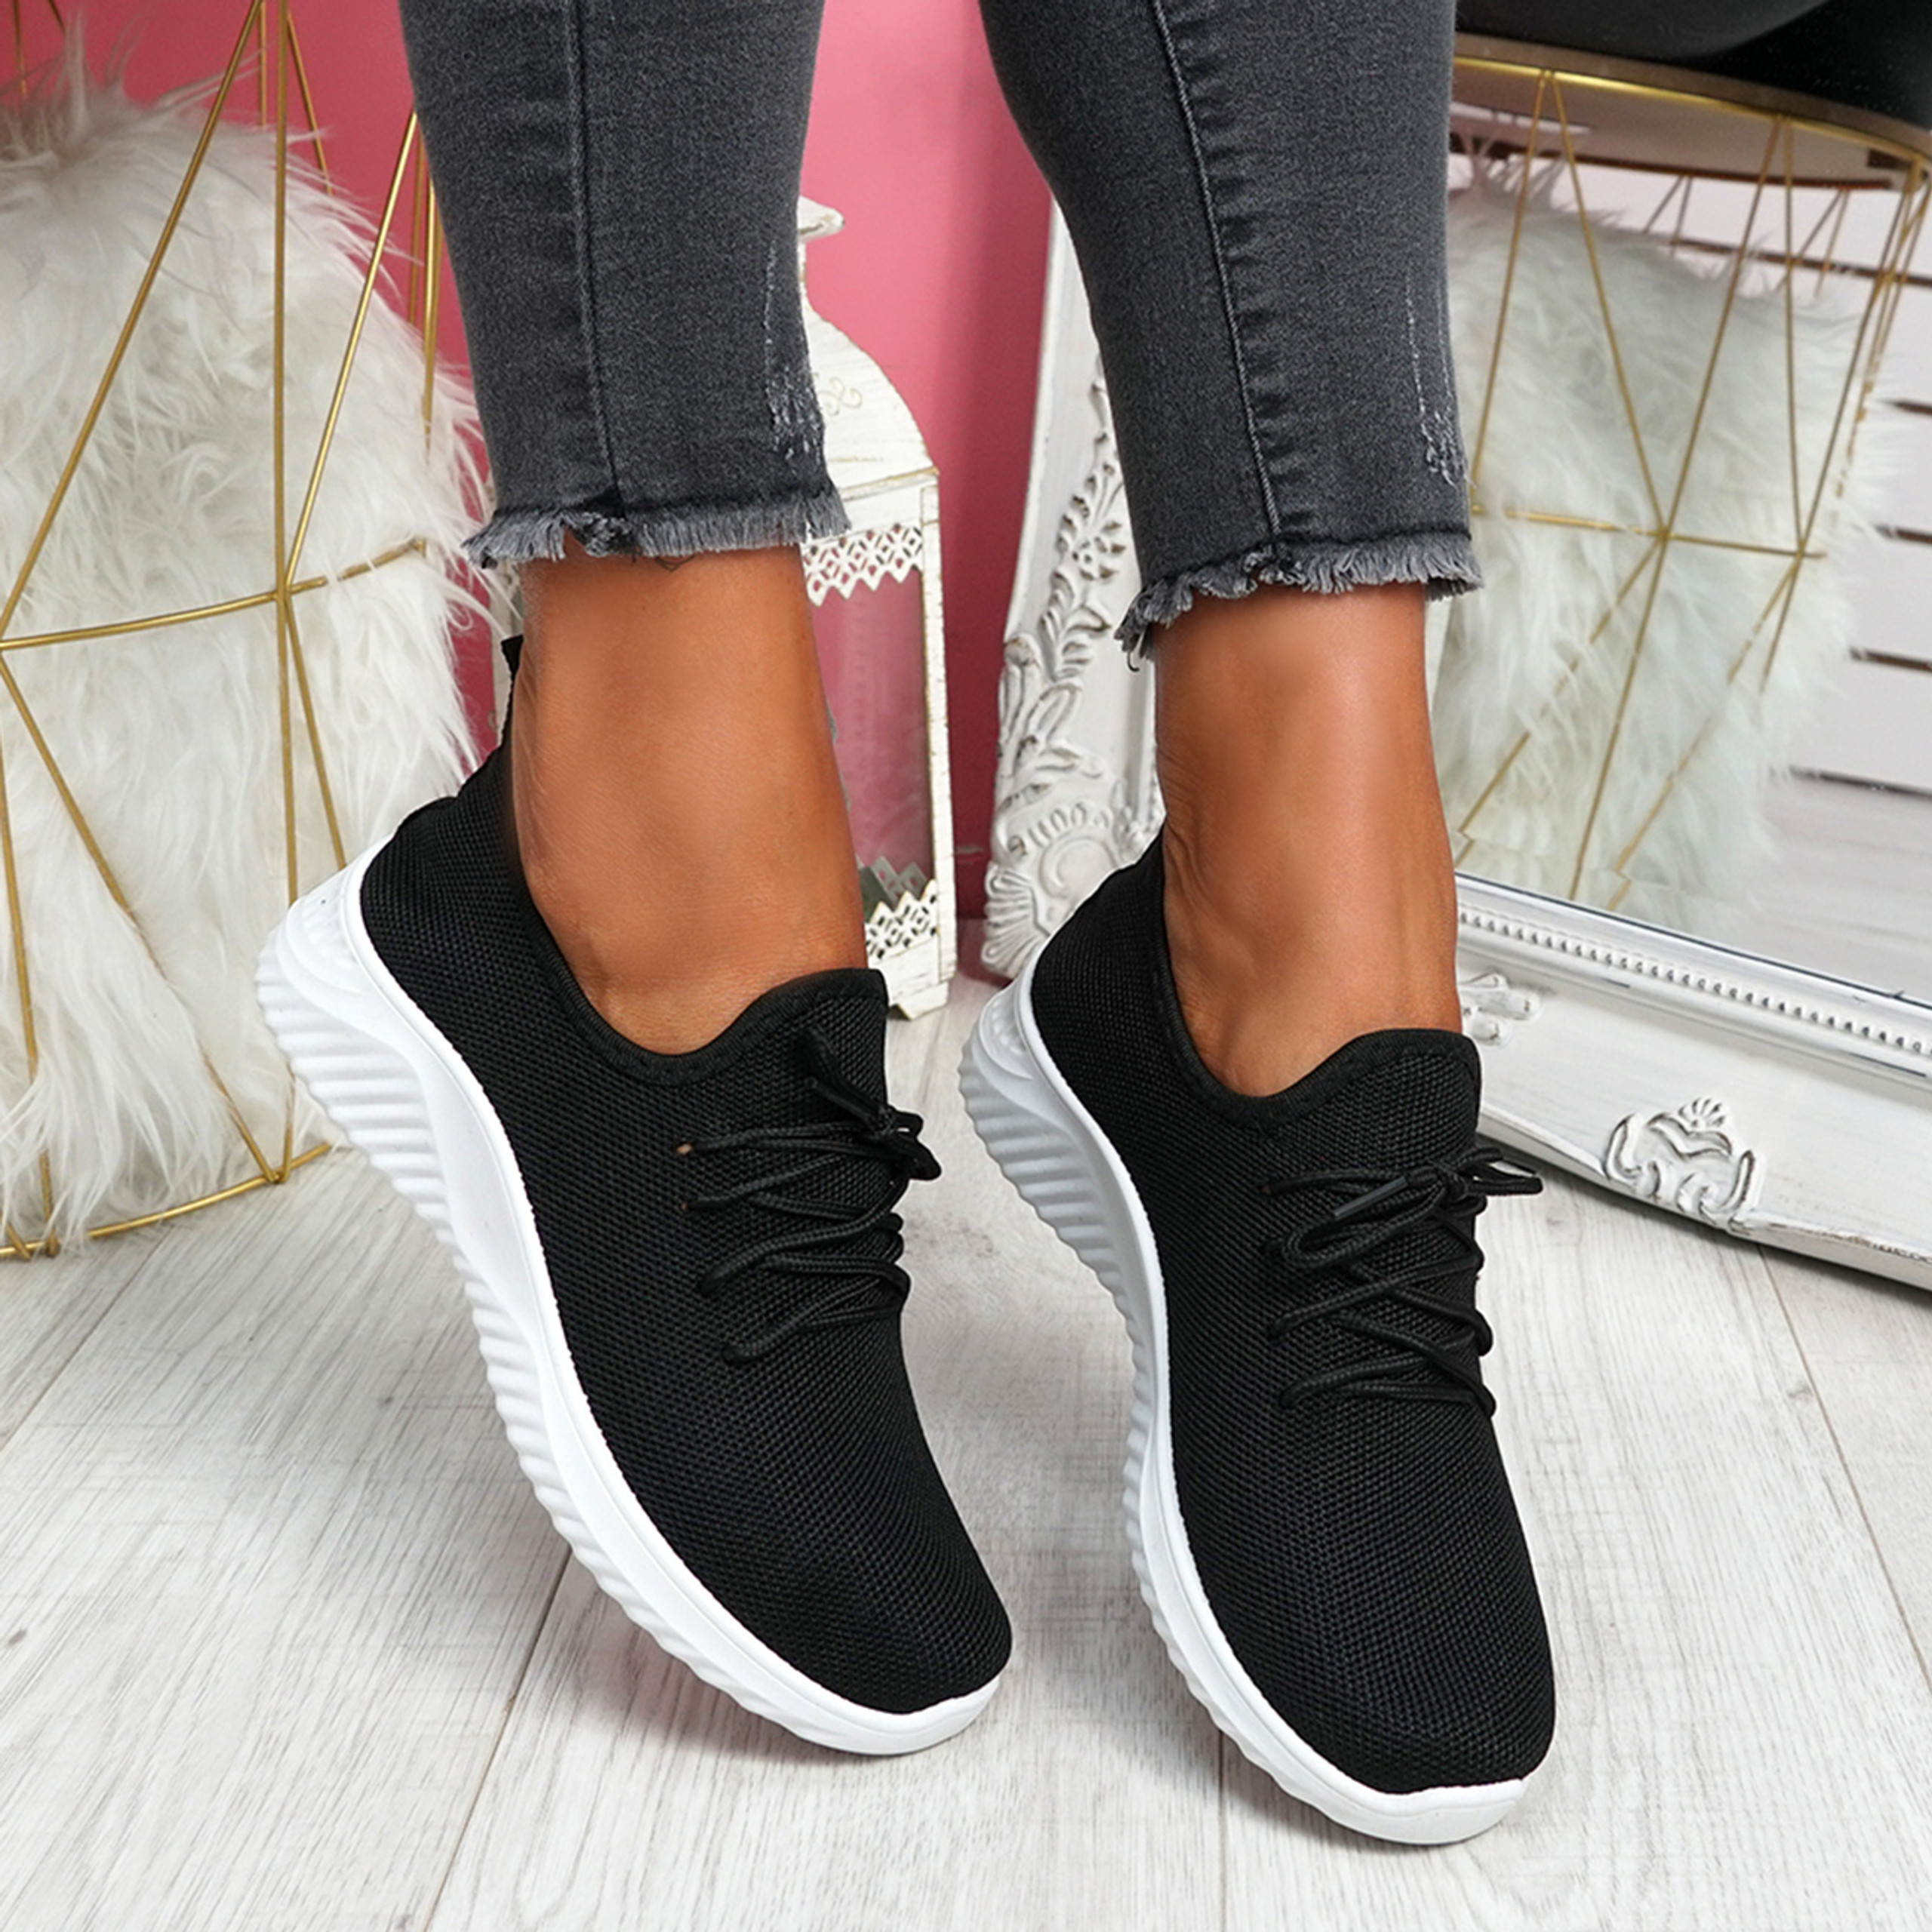 Loky Black Running Trainers